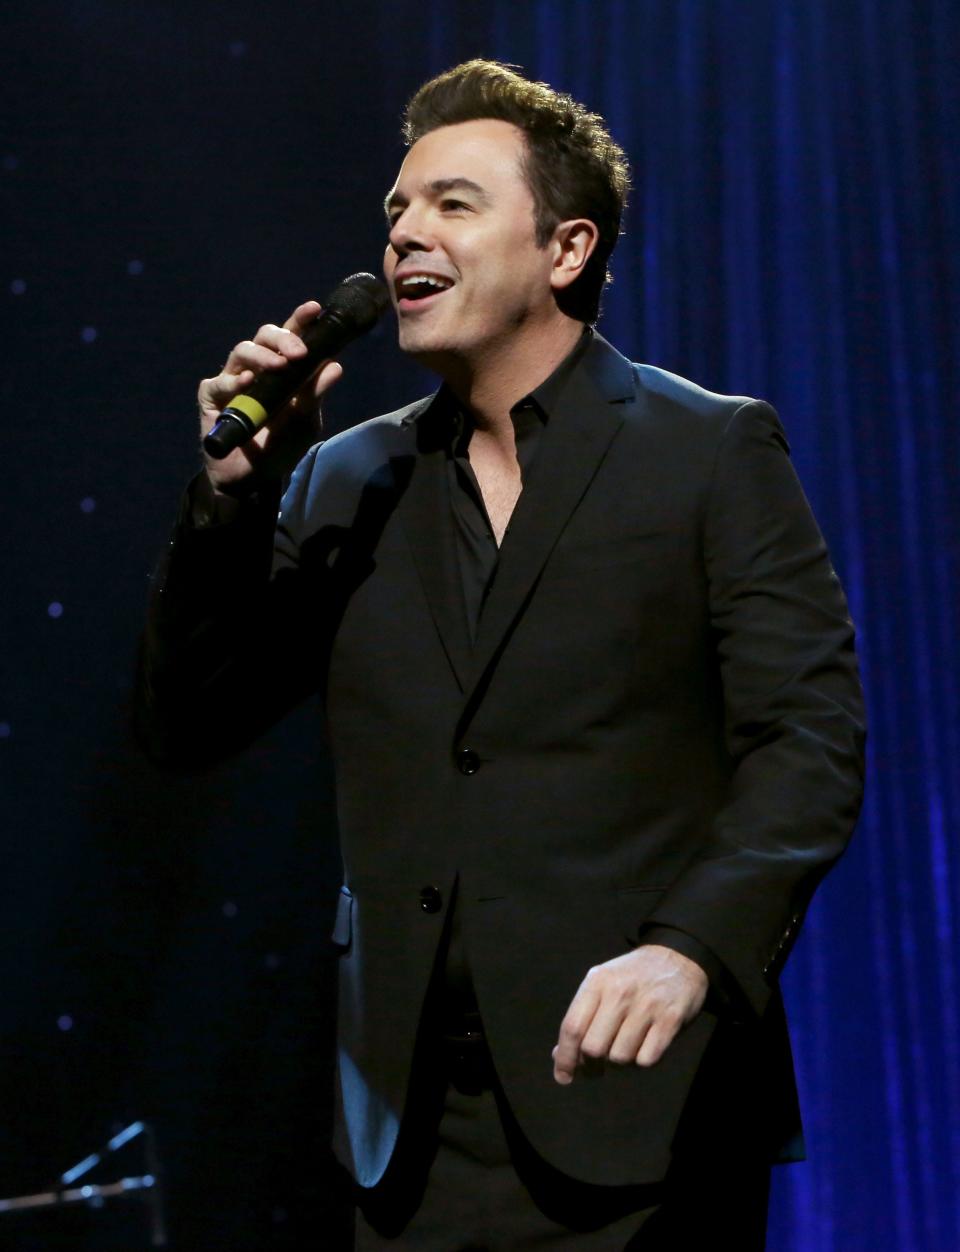 "Family Guy" creator Seth MacFarlane will perform with actress Elizabeth Gillies at the McCallum Theatre in Palm Desert, Calif., on Dec. 5, 2023.